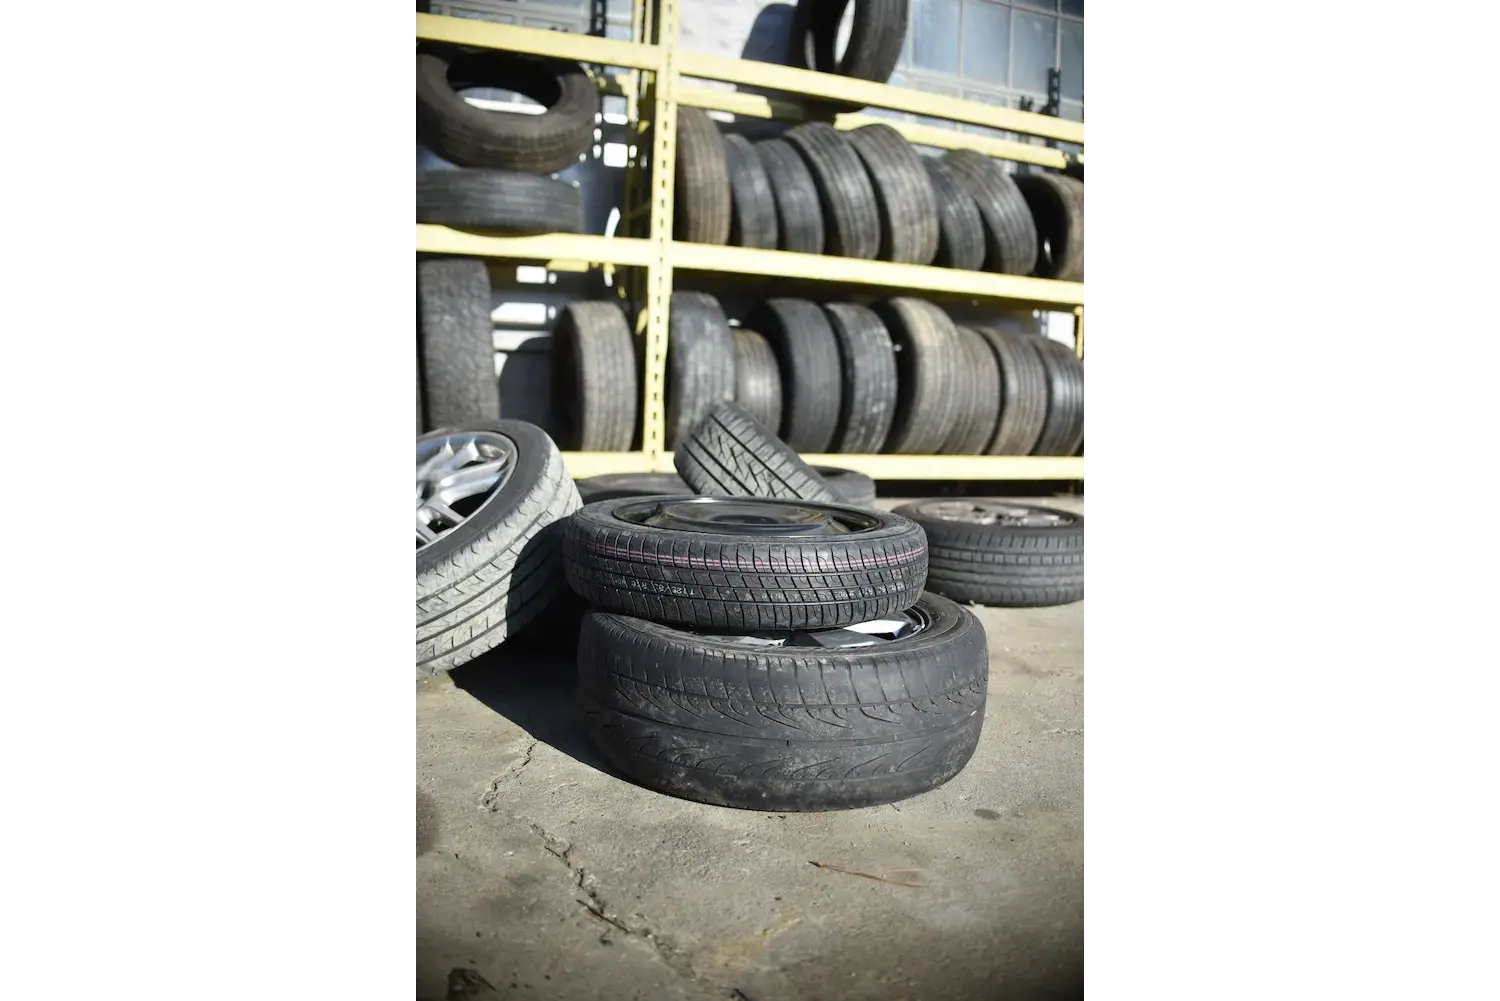 Tires on the ground